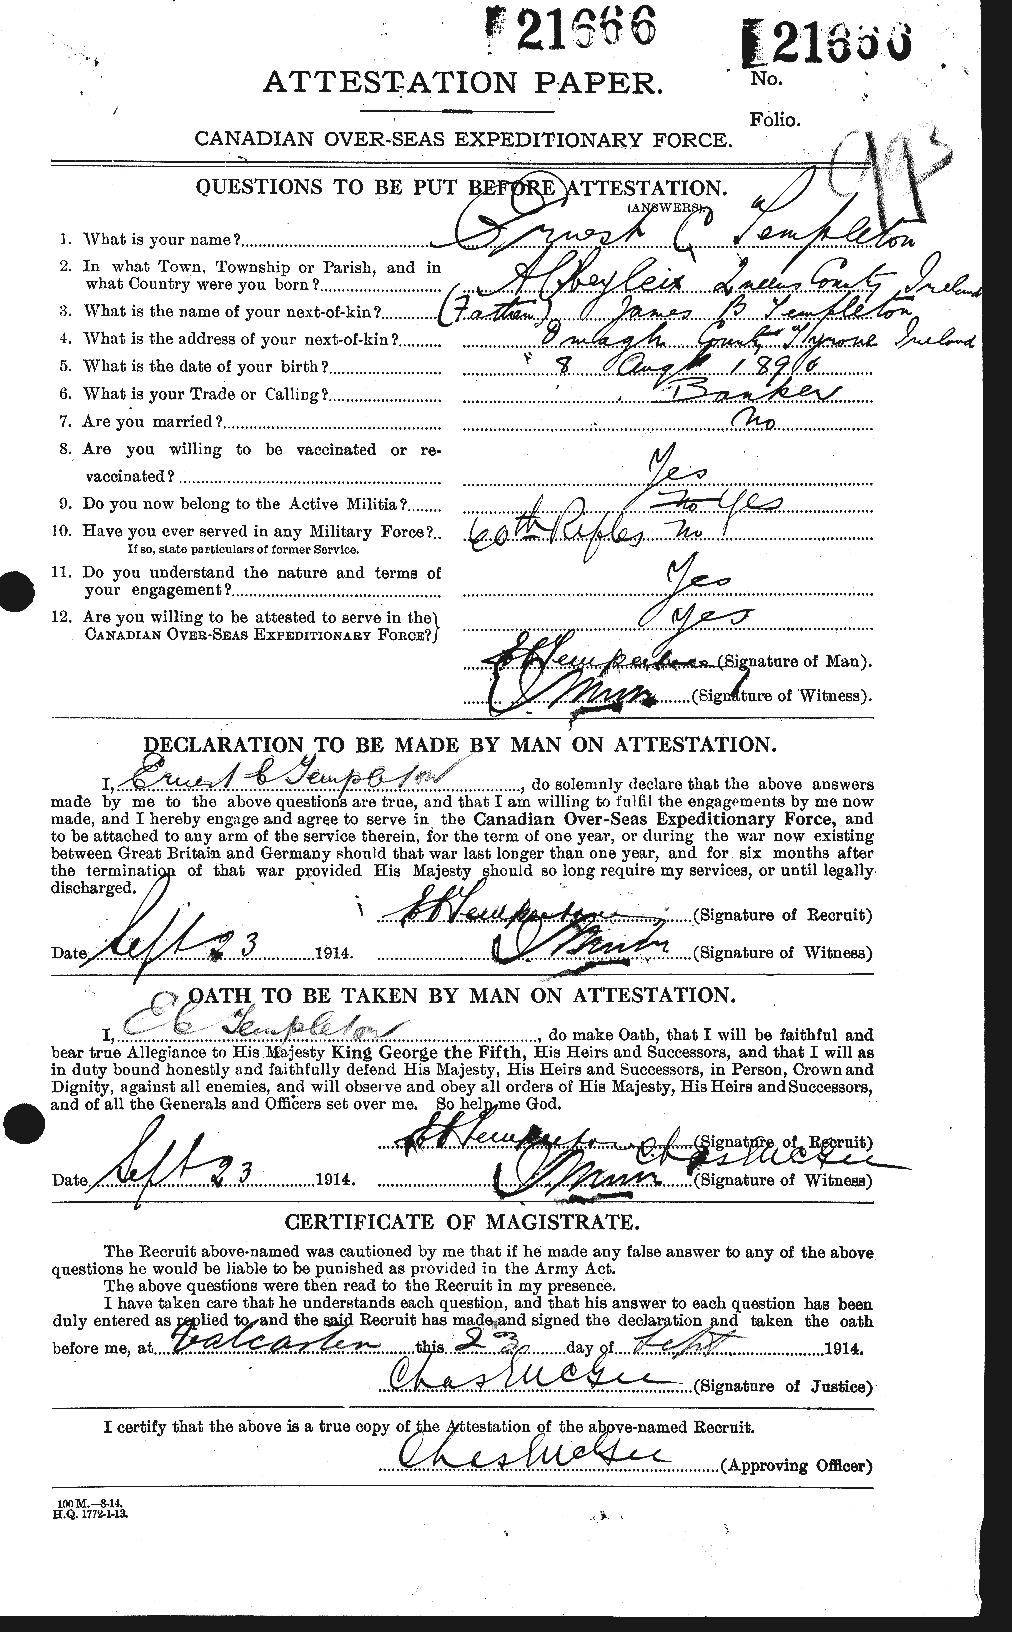 Personnel Records of the First World War - CEF 629149a